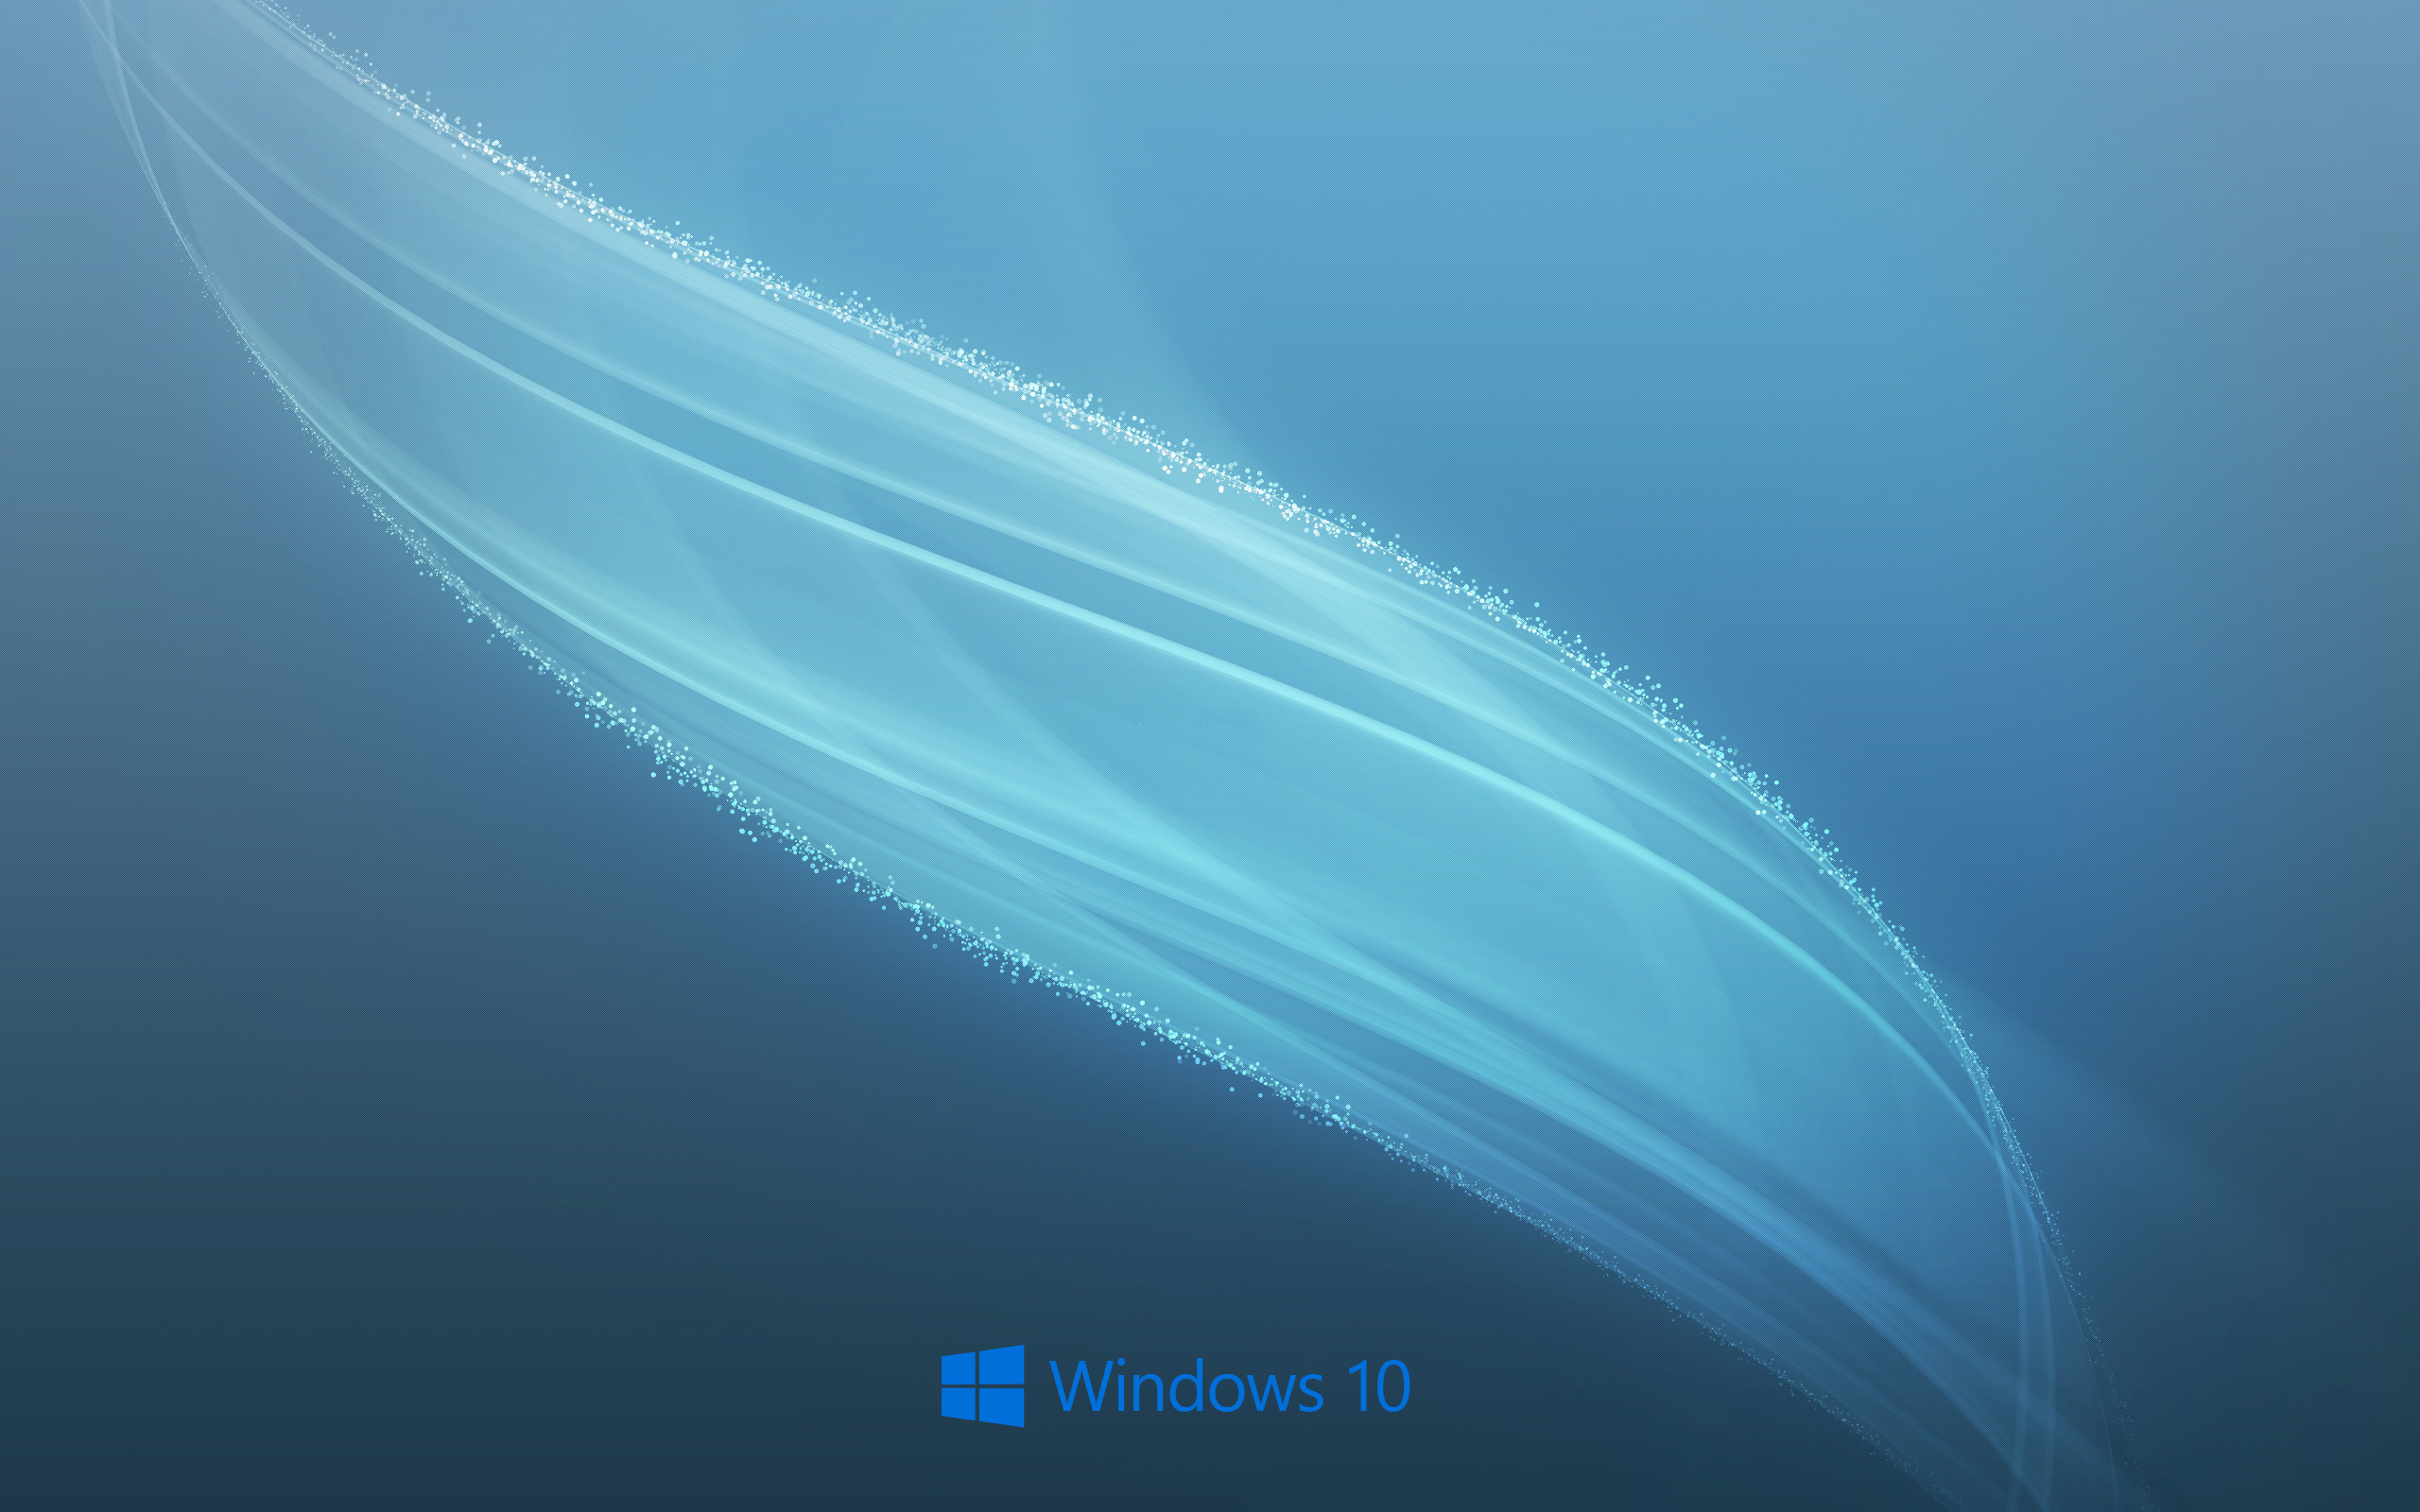 Windows Wallpaper With Light Wave Pattern HD For